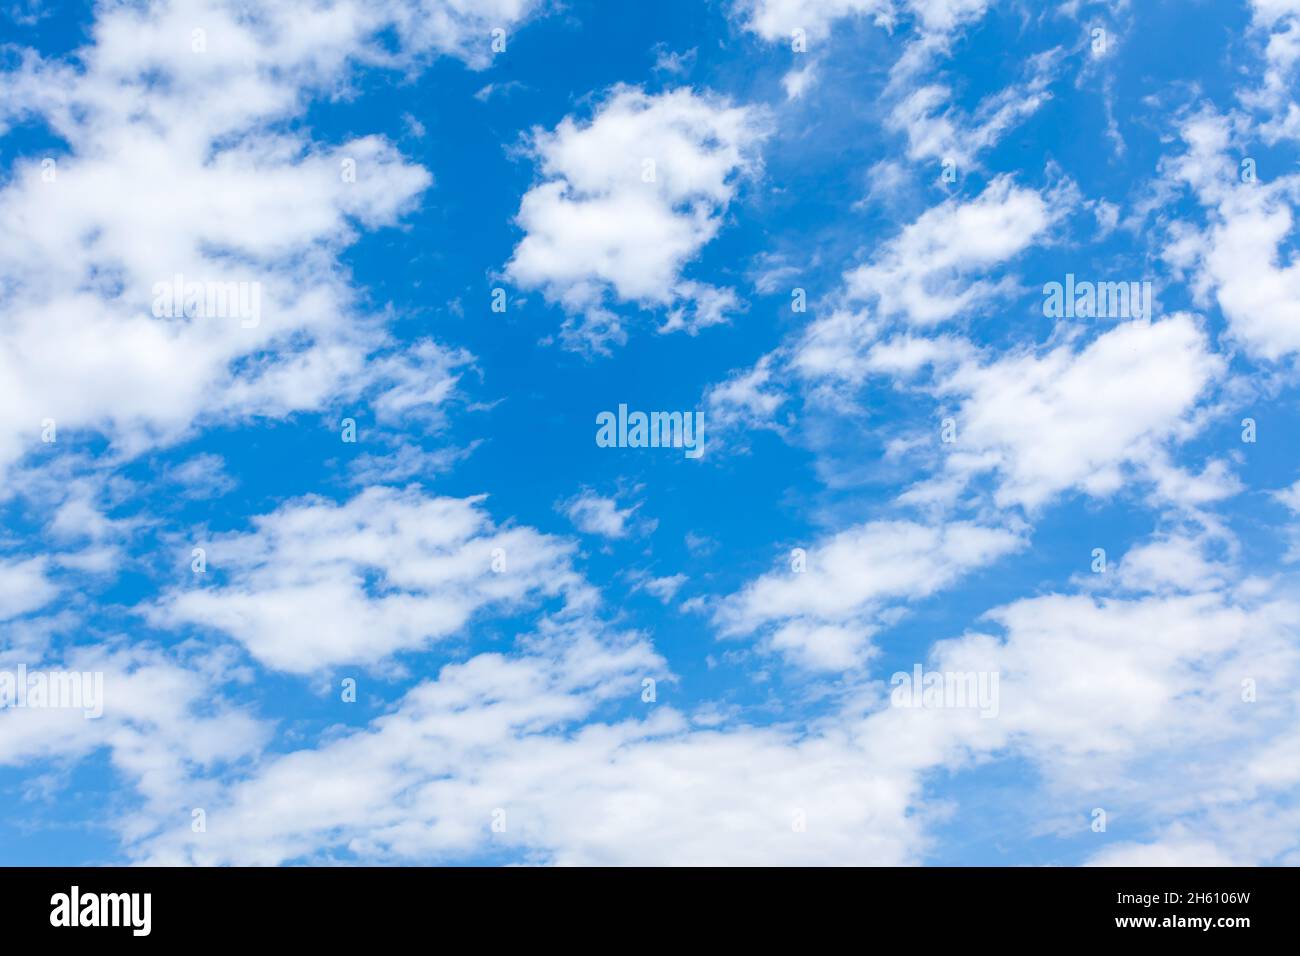 Fast moving clouds in the blue sky, may be used as background Stock Photo